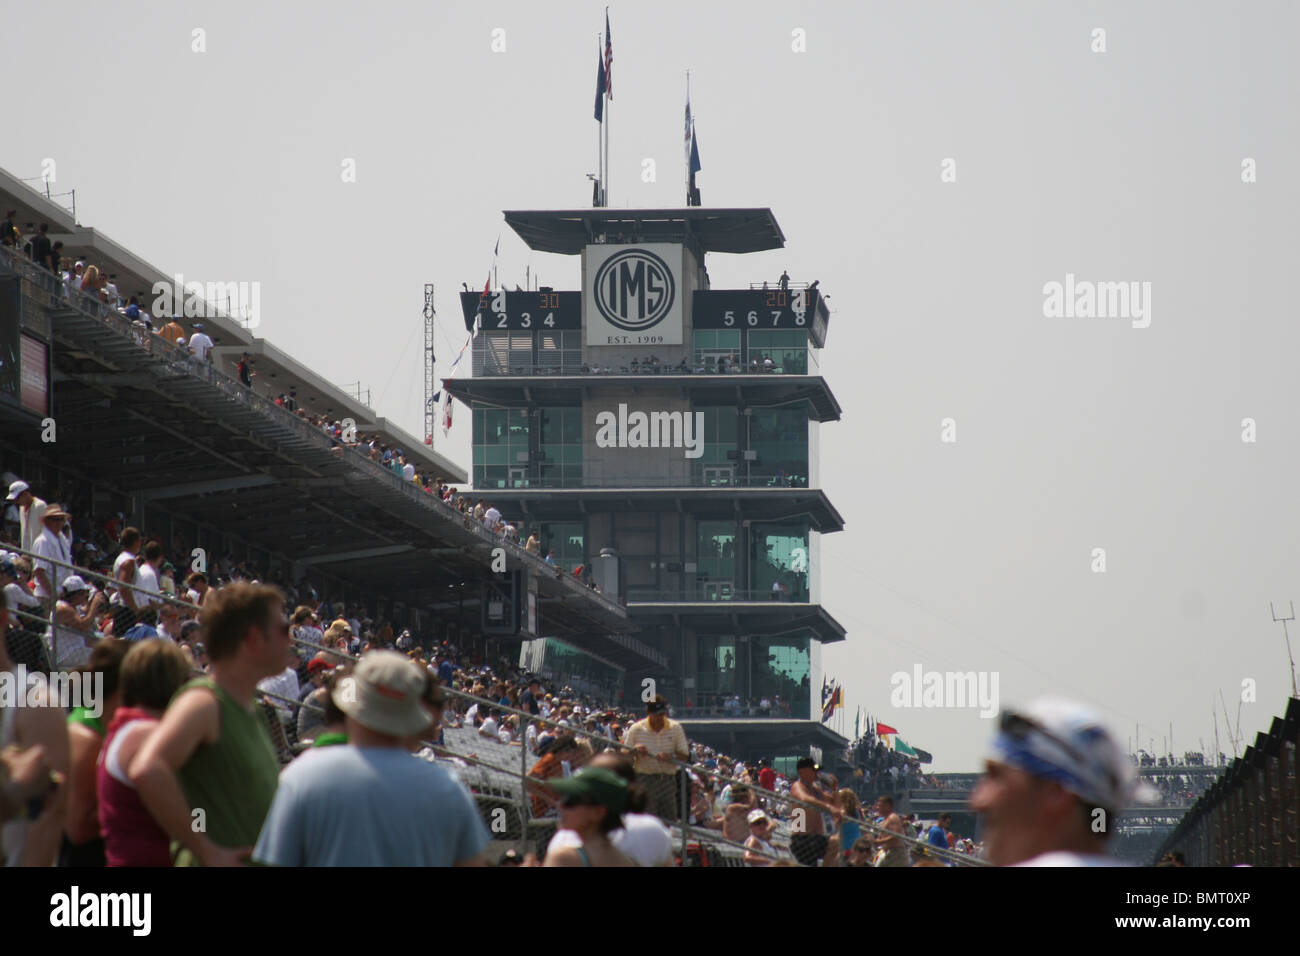 The IMS tower at the Indianapolis 500 race in Speedway, IN during the 2010 Indy 500 race. Stock Photo